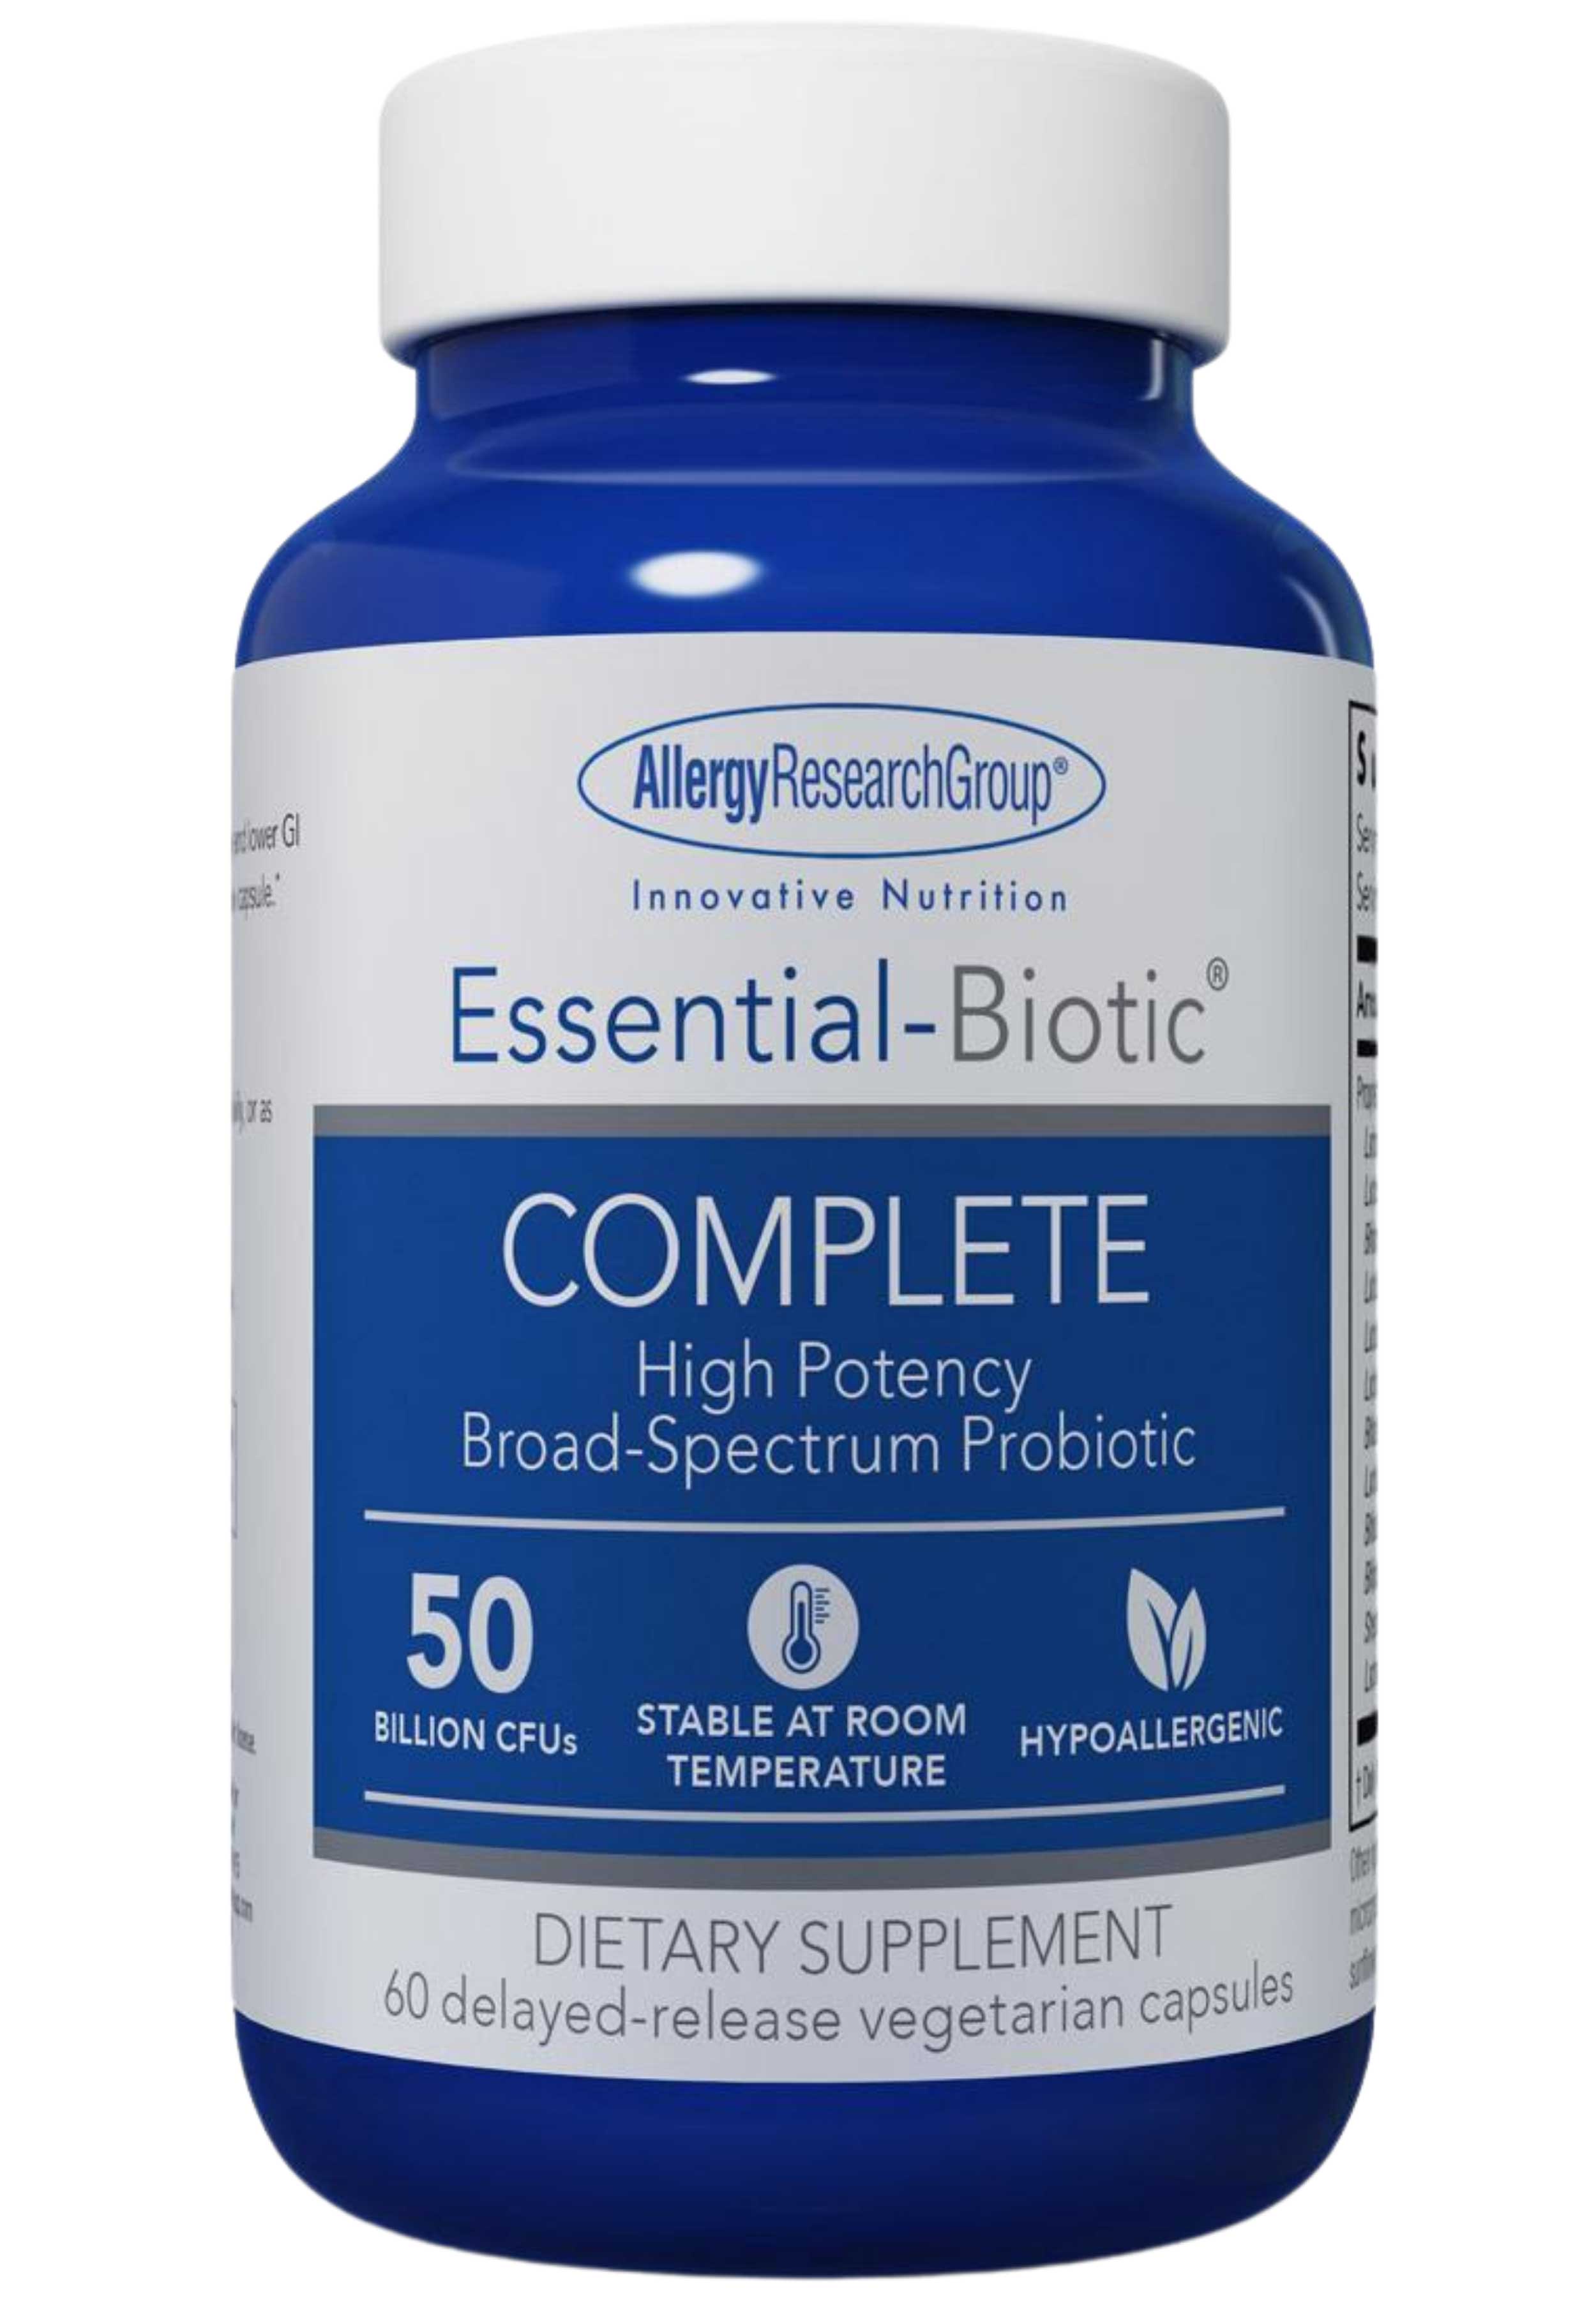 Allergy Research Group Essential-Biotic Complete